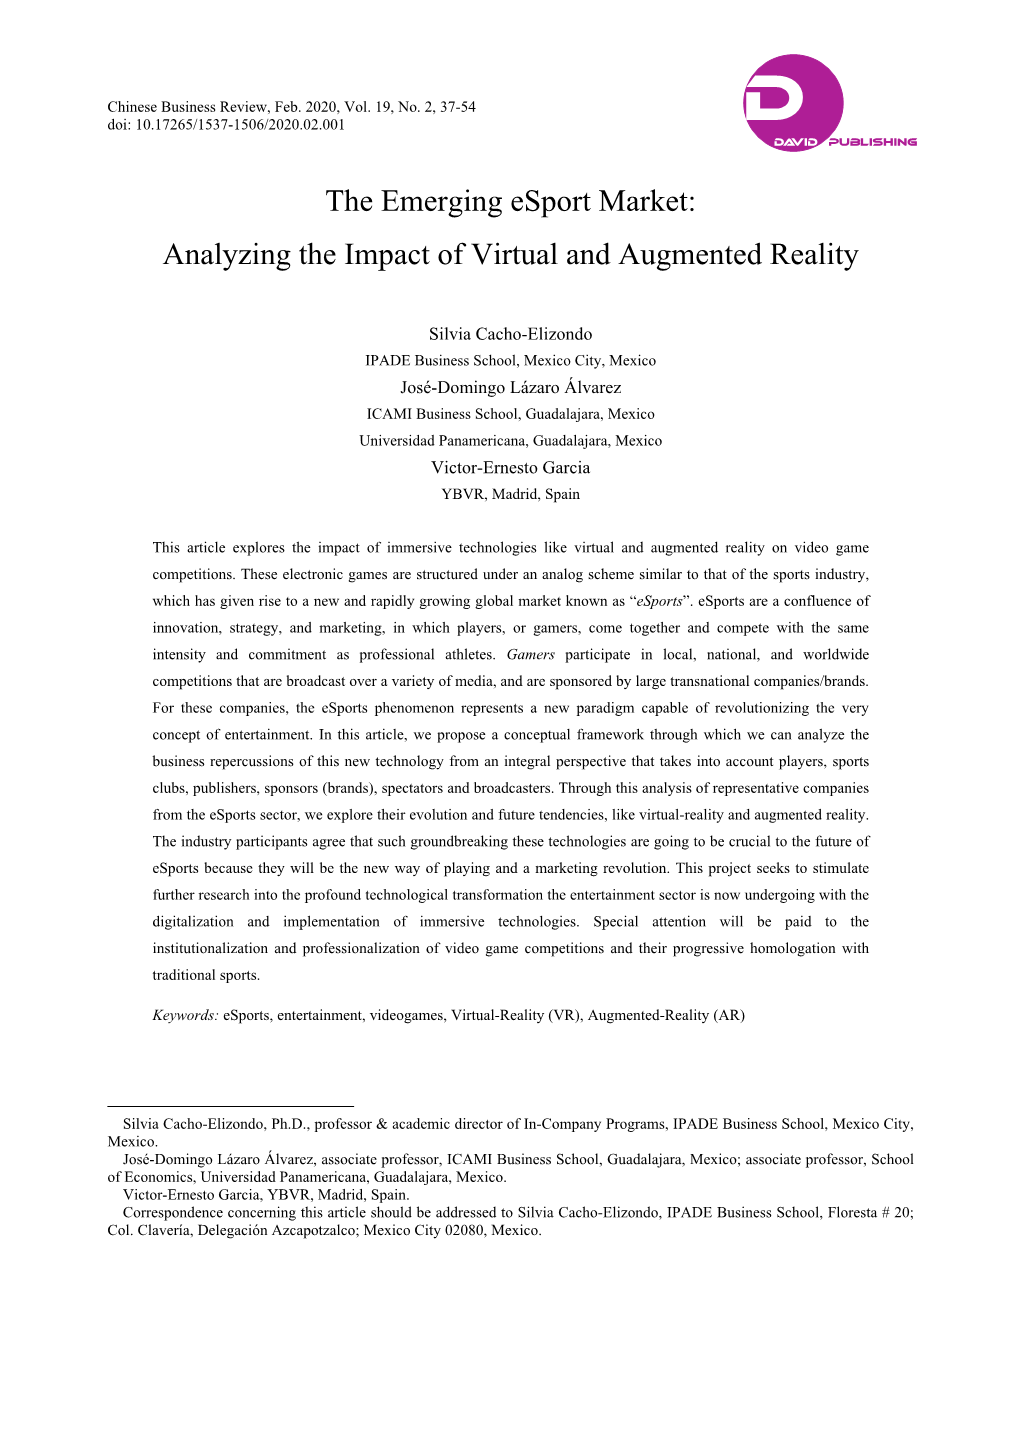 The Emerging Esport Market: Analyzing the Impact of Virtual and Augmented Reality